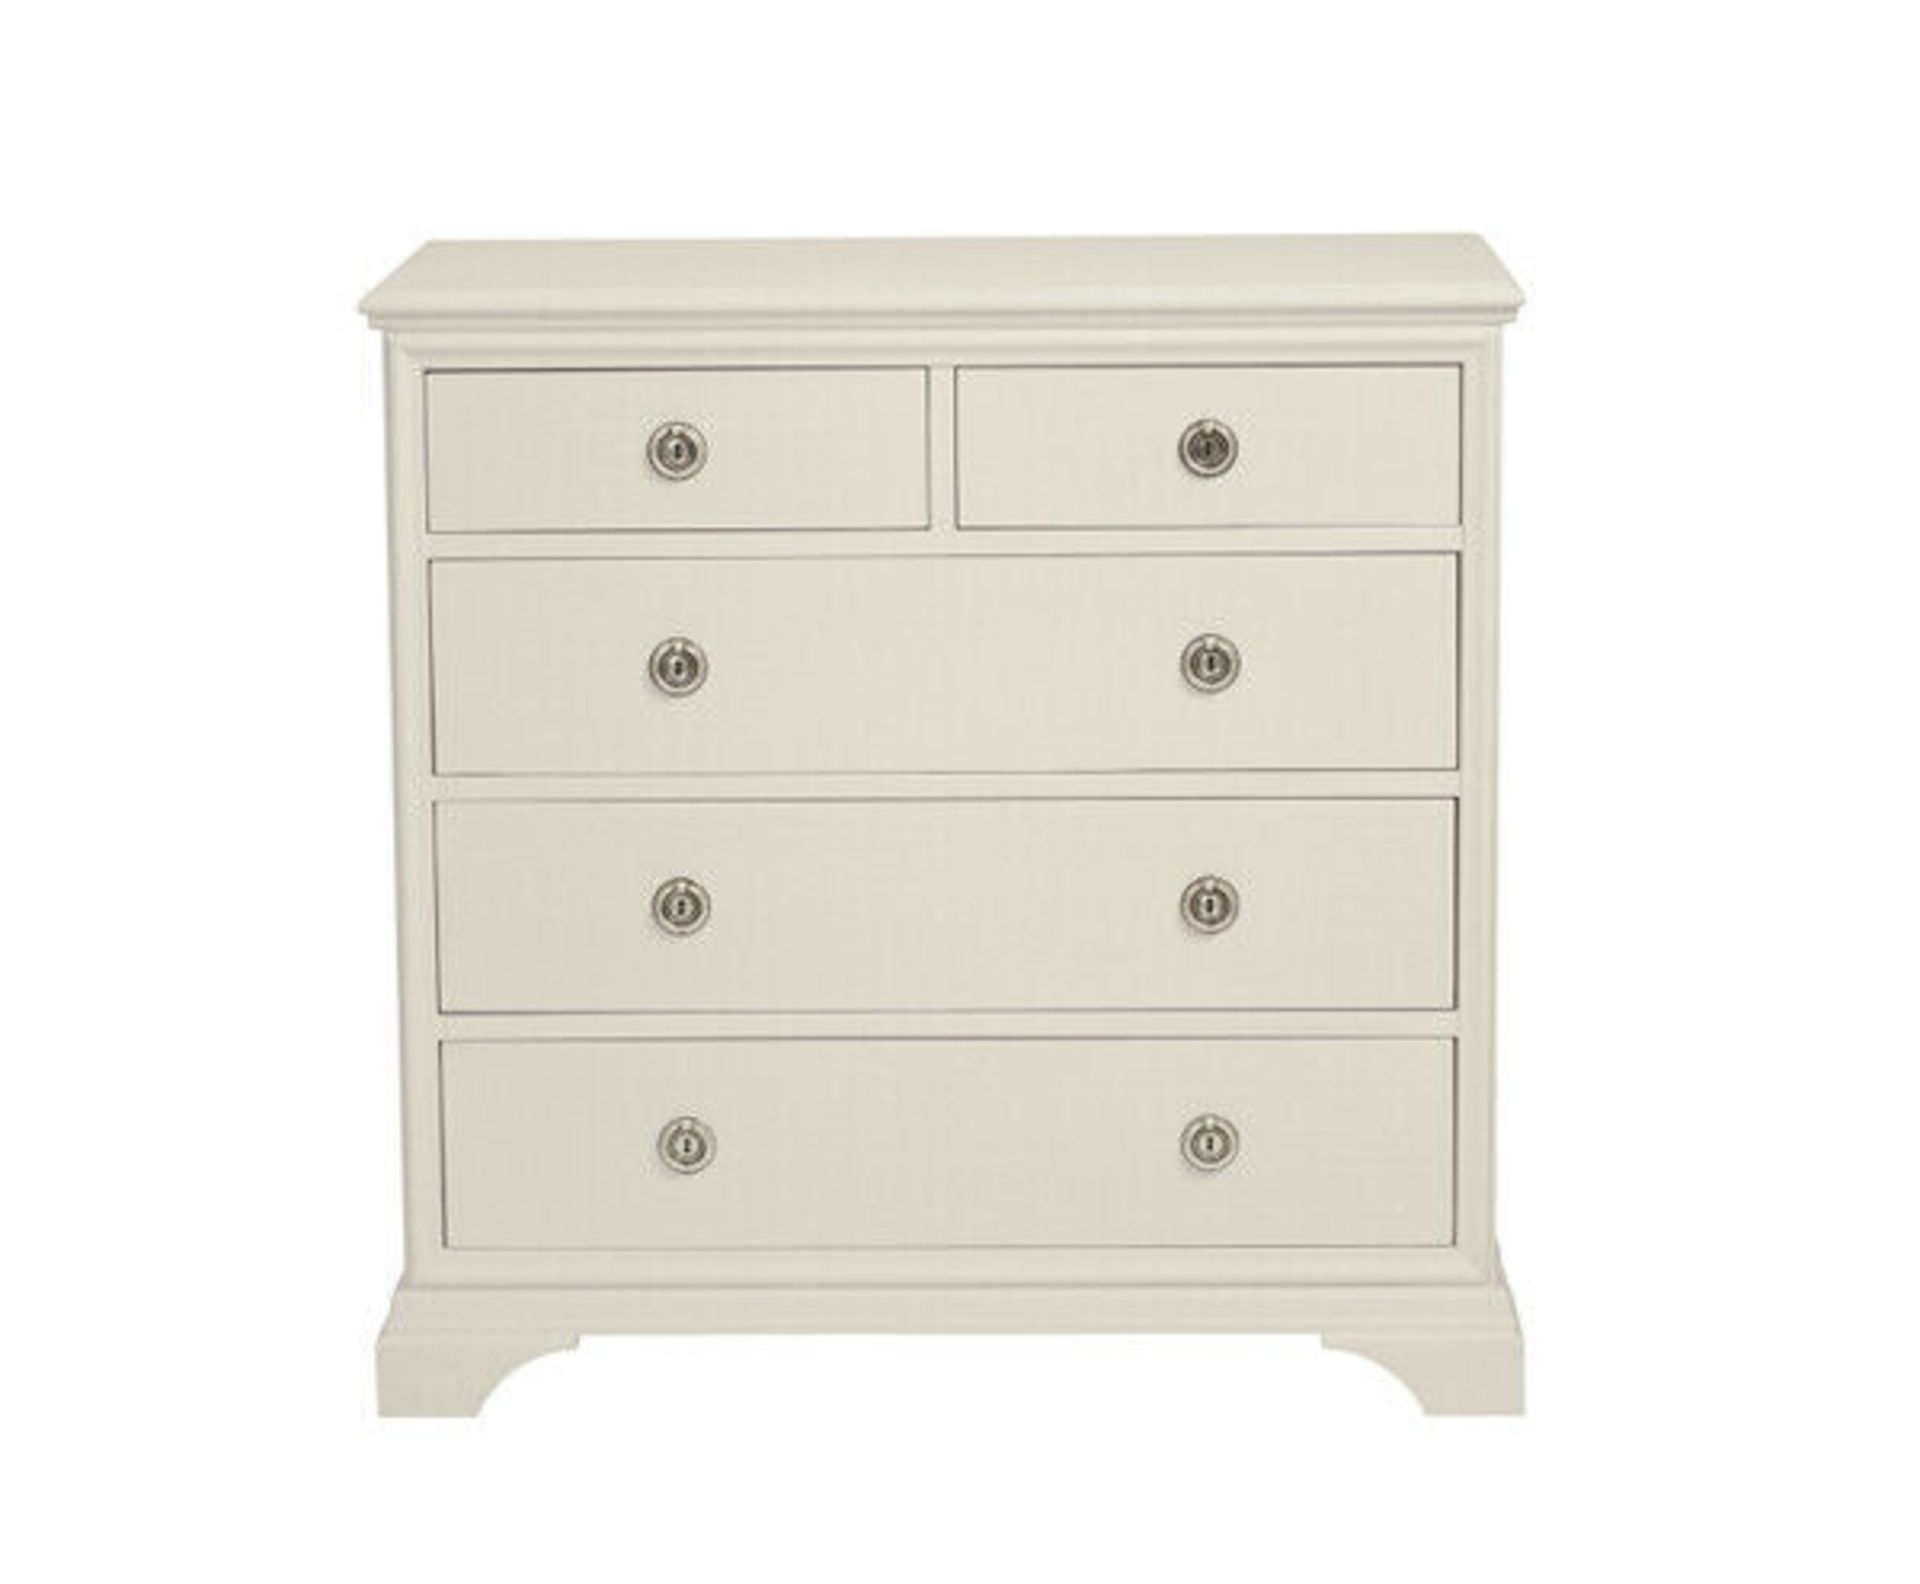 Laura Ashley Gabrielle Dove Grey 3+2 Drawer Chest boasting classic French design with a hand